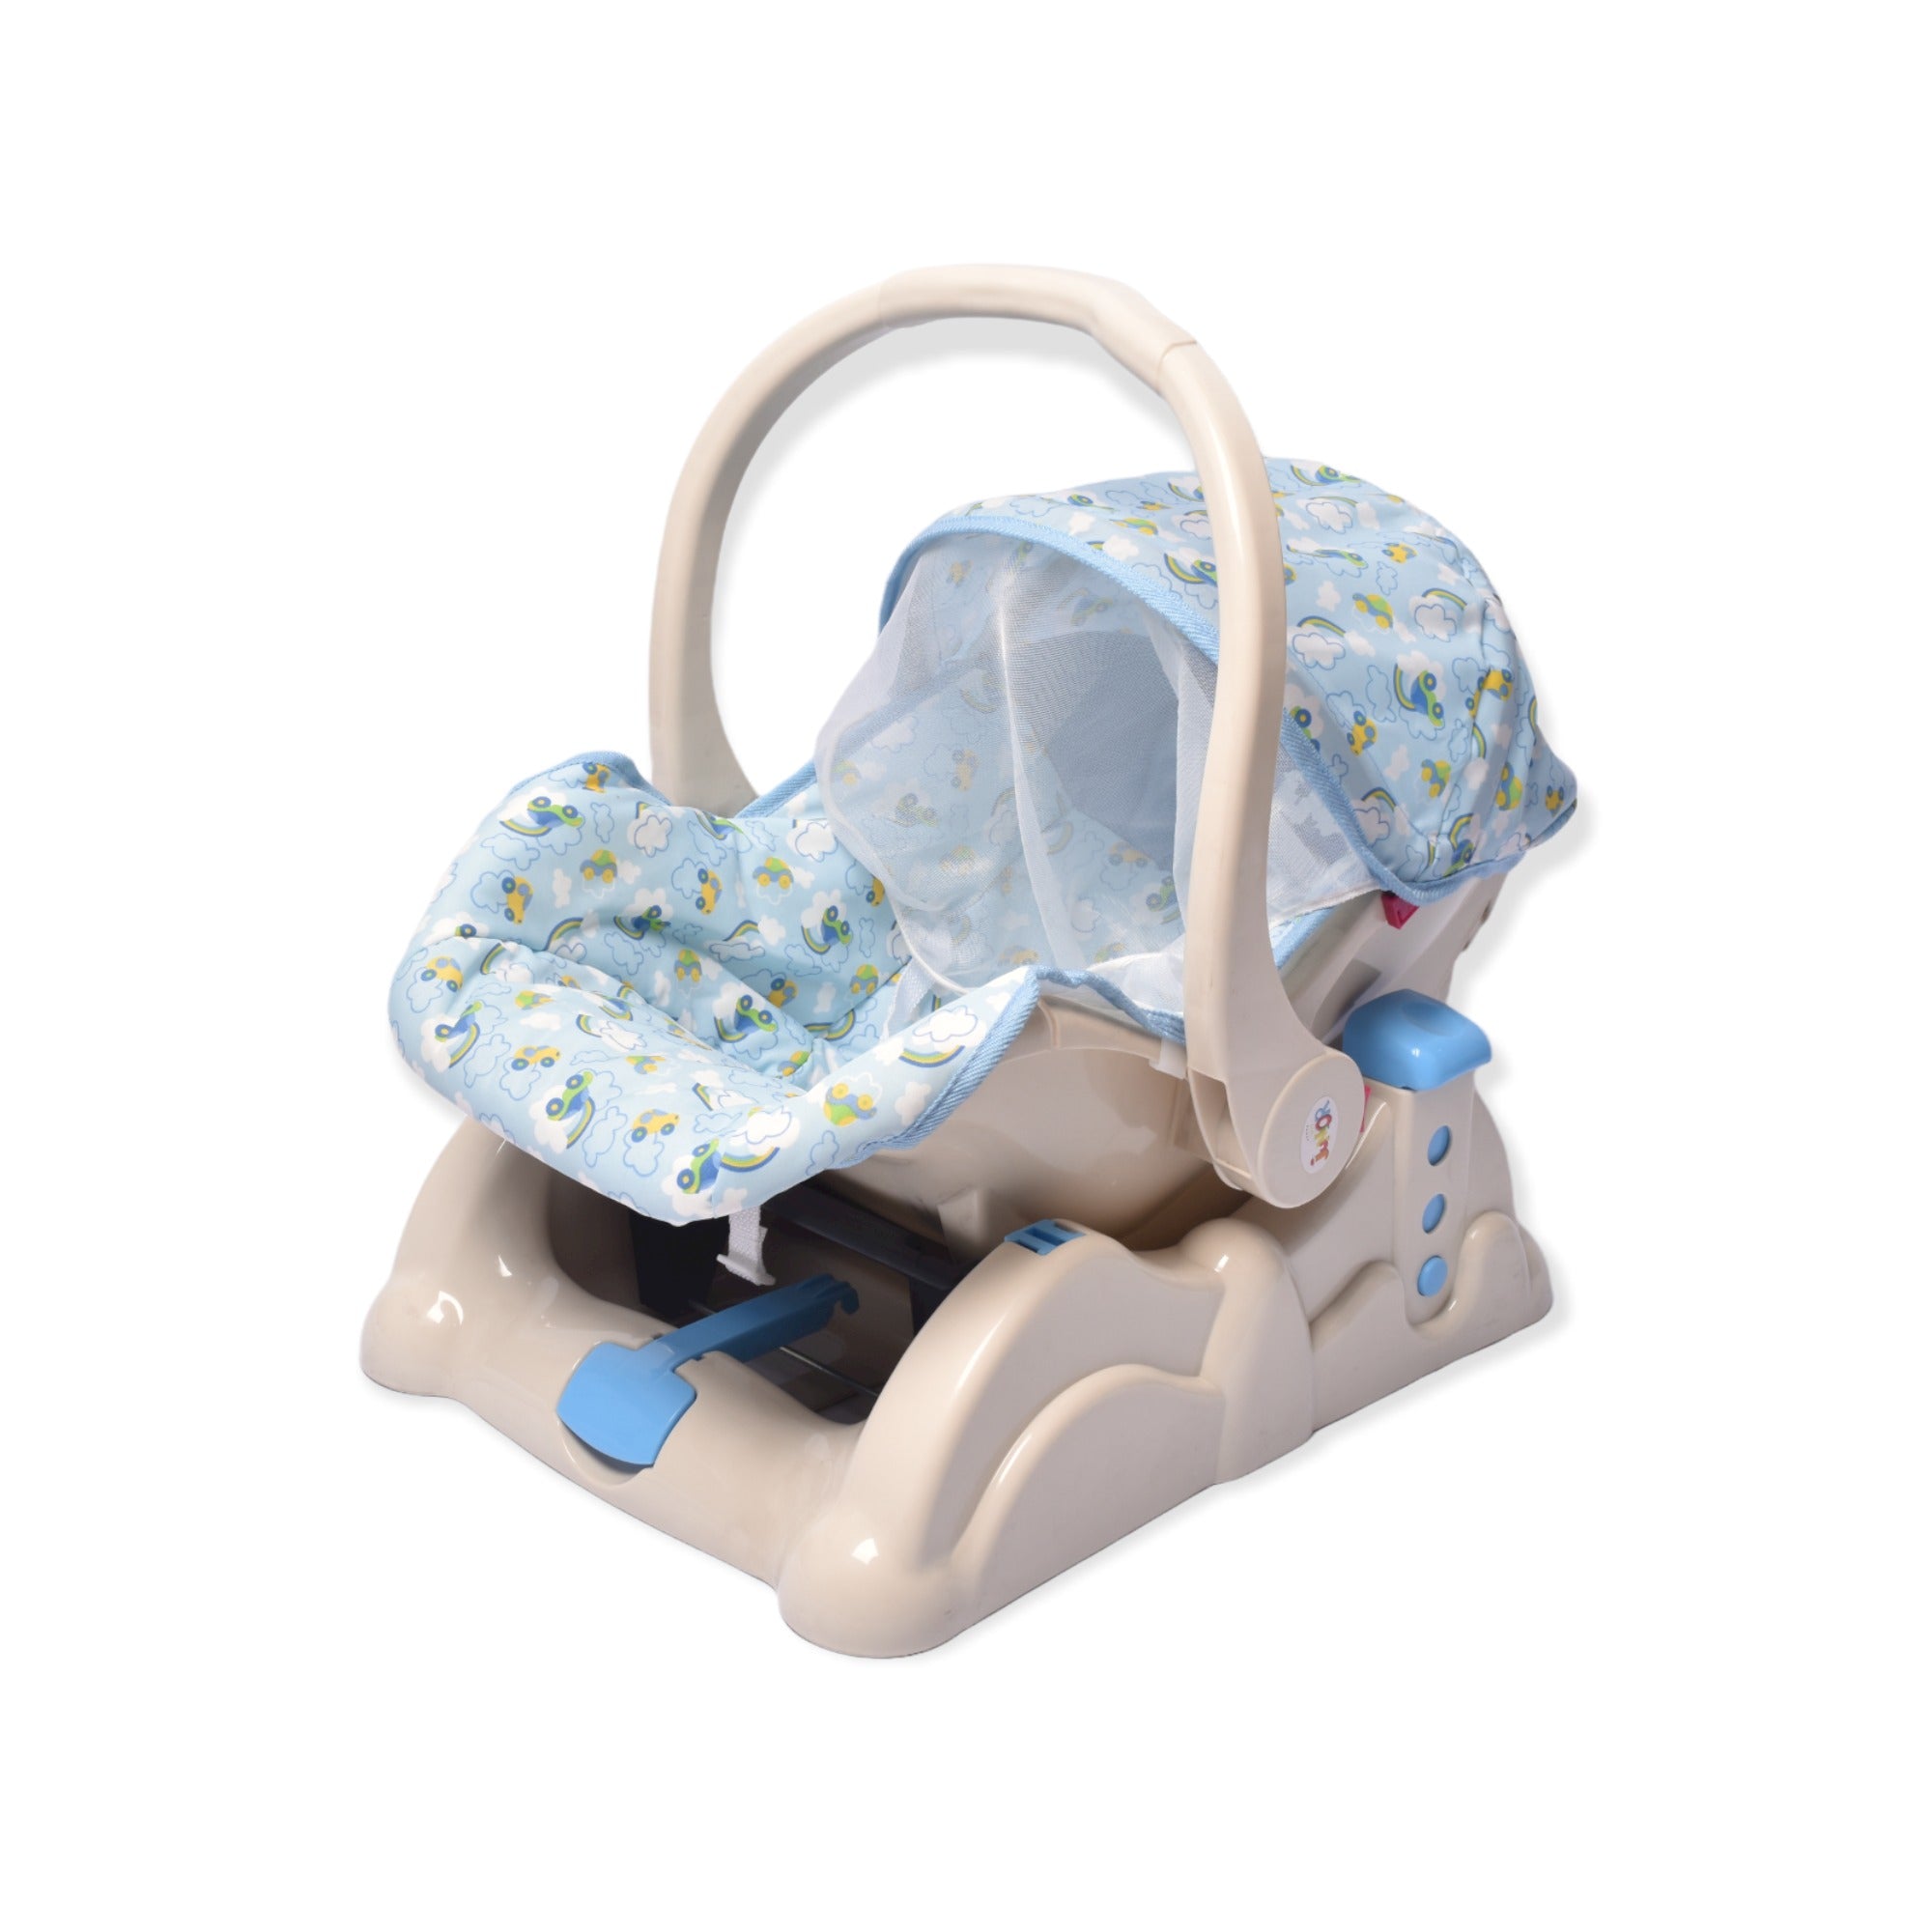 Quality Baby Carry Cot Car Seat With Net